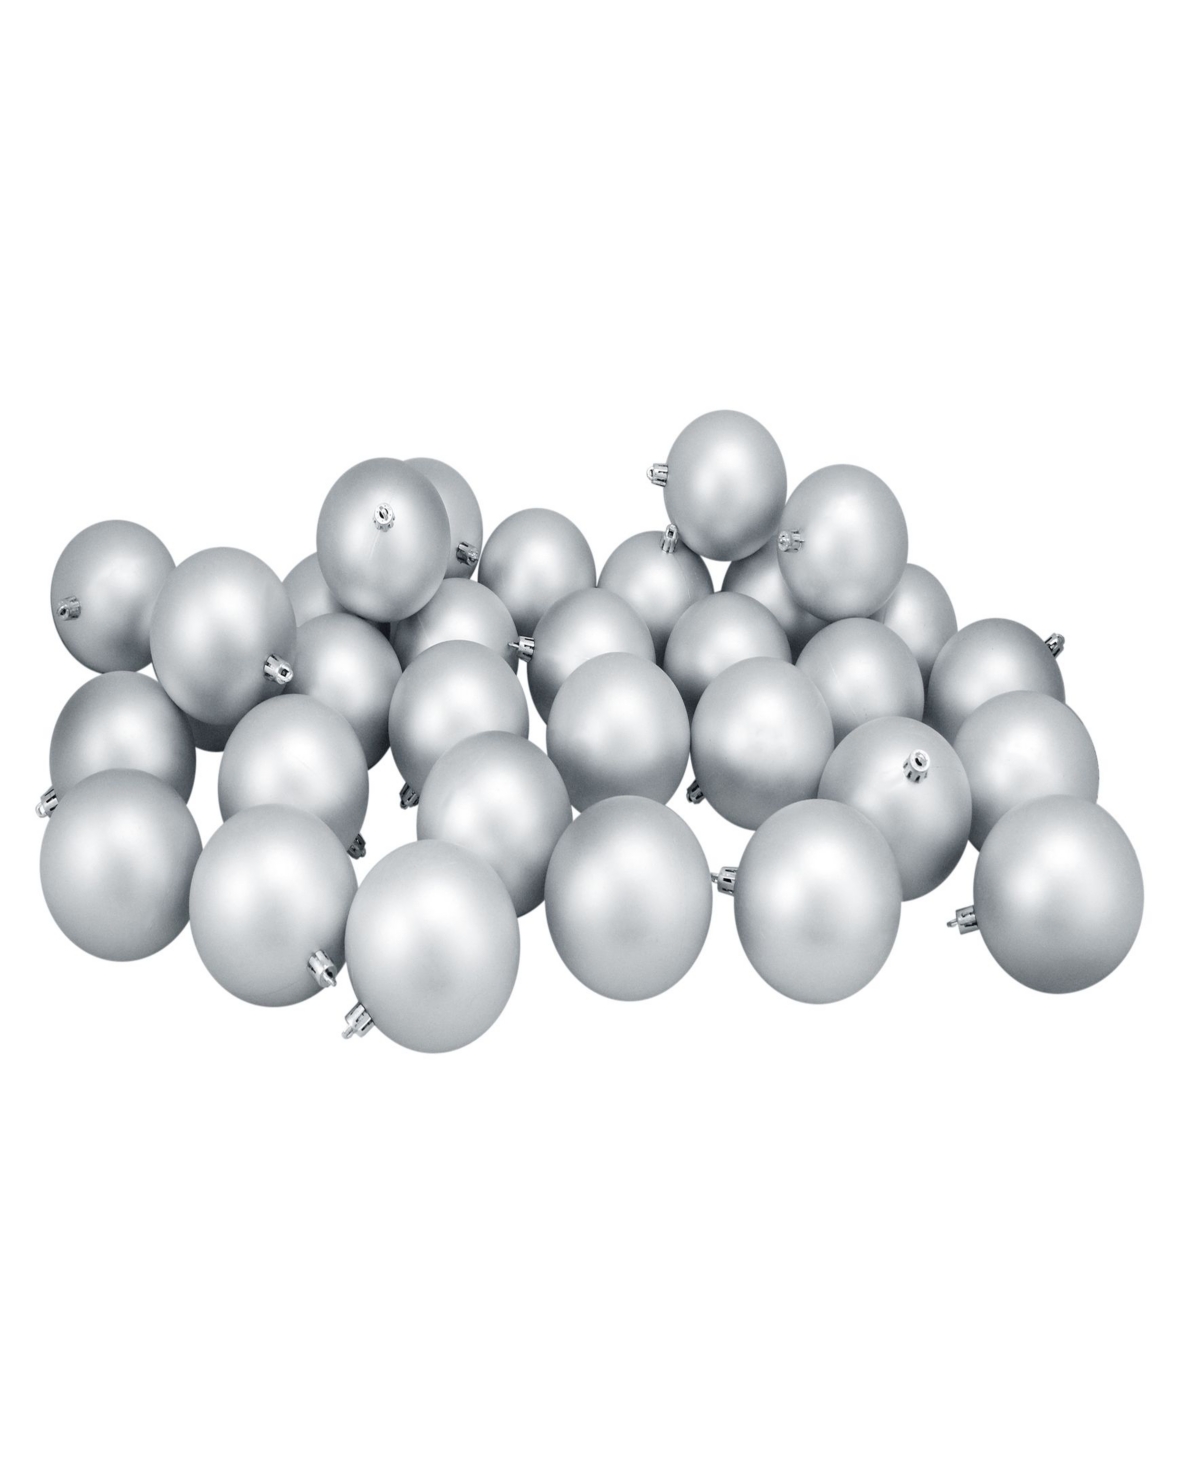 Northlight 3.25" Shatter-resistant Matte Christmas Ball Ornaments, Set Of 32 In Silver-tone